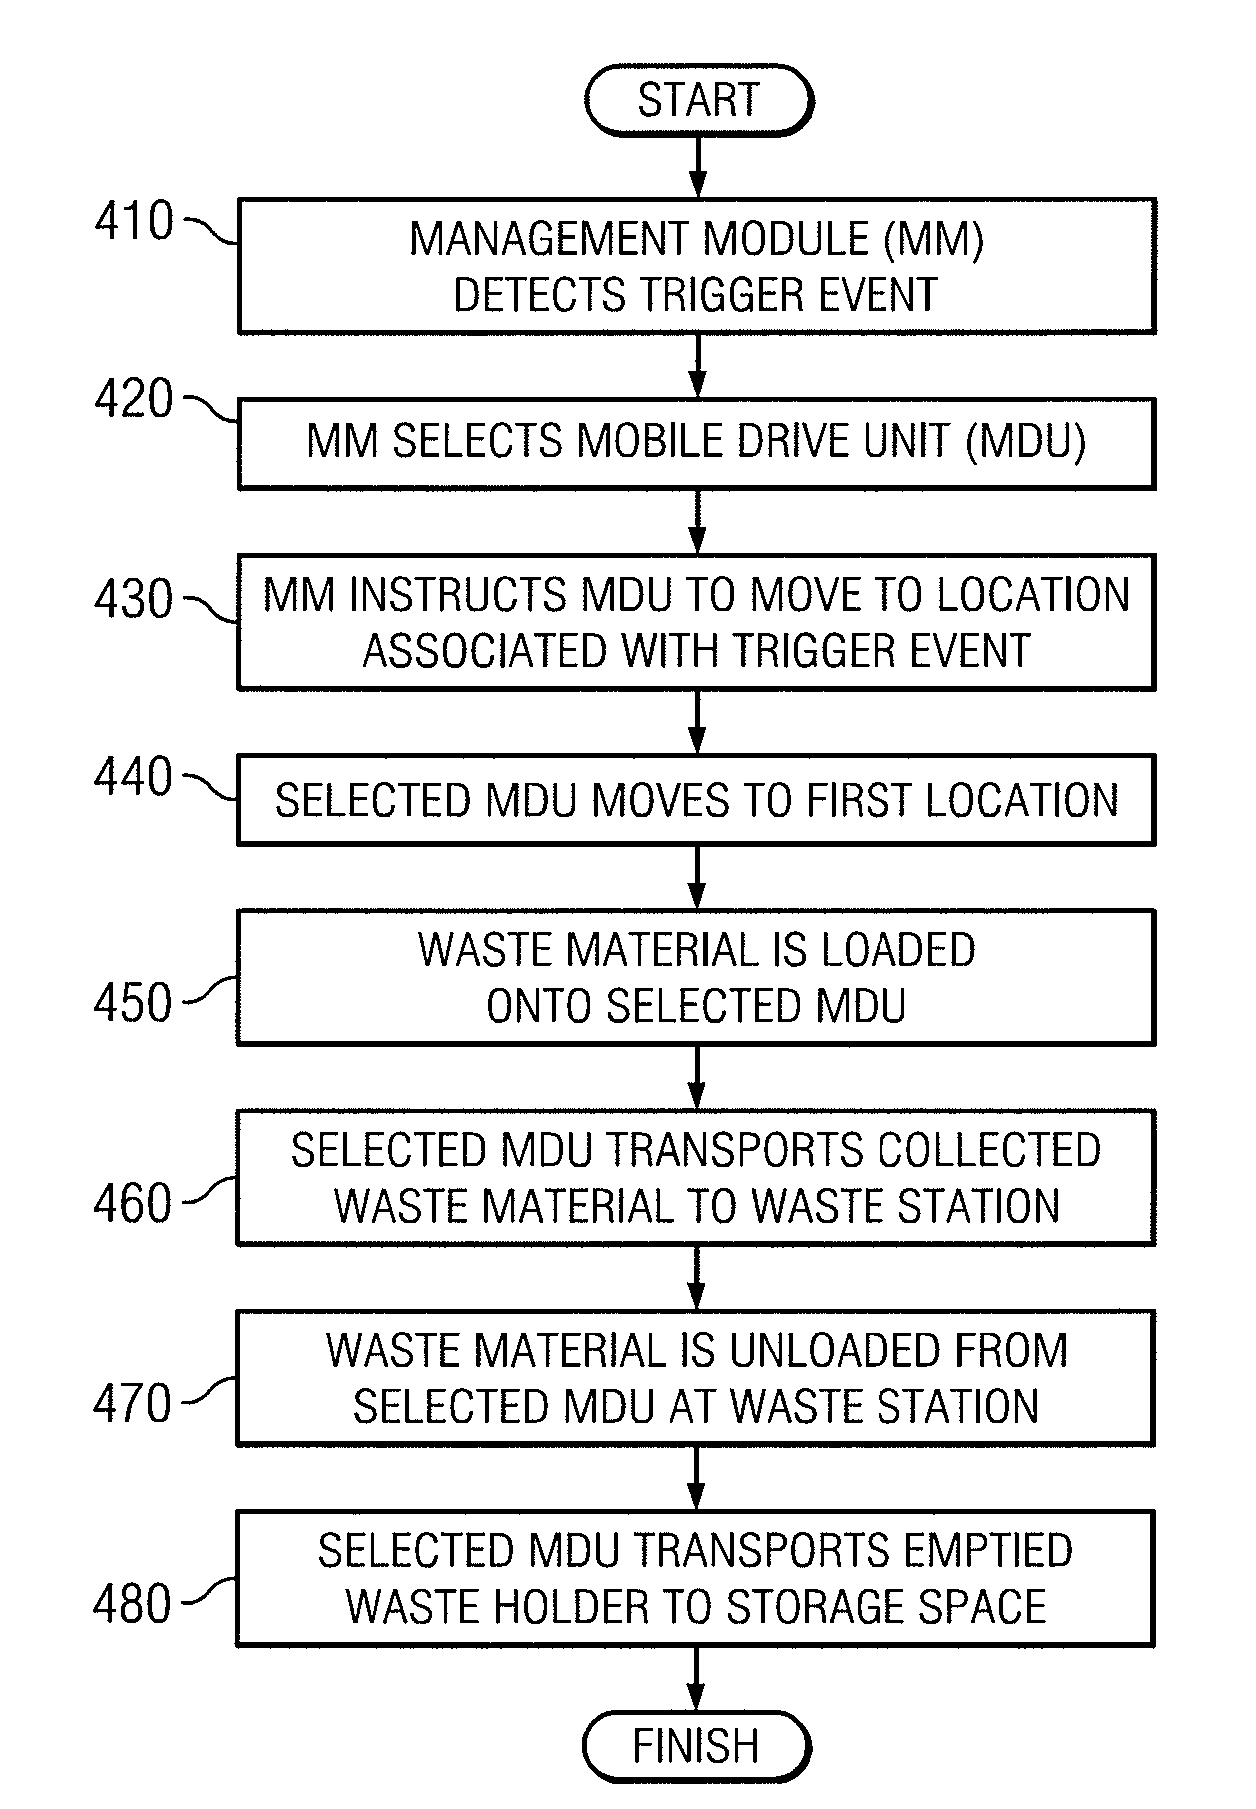 System and Method for Processing Waste Material